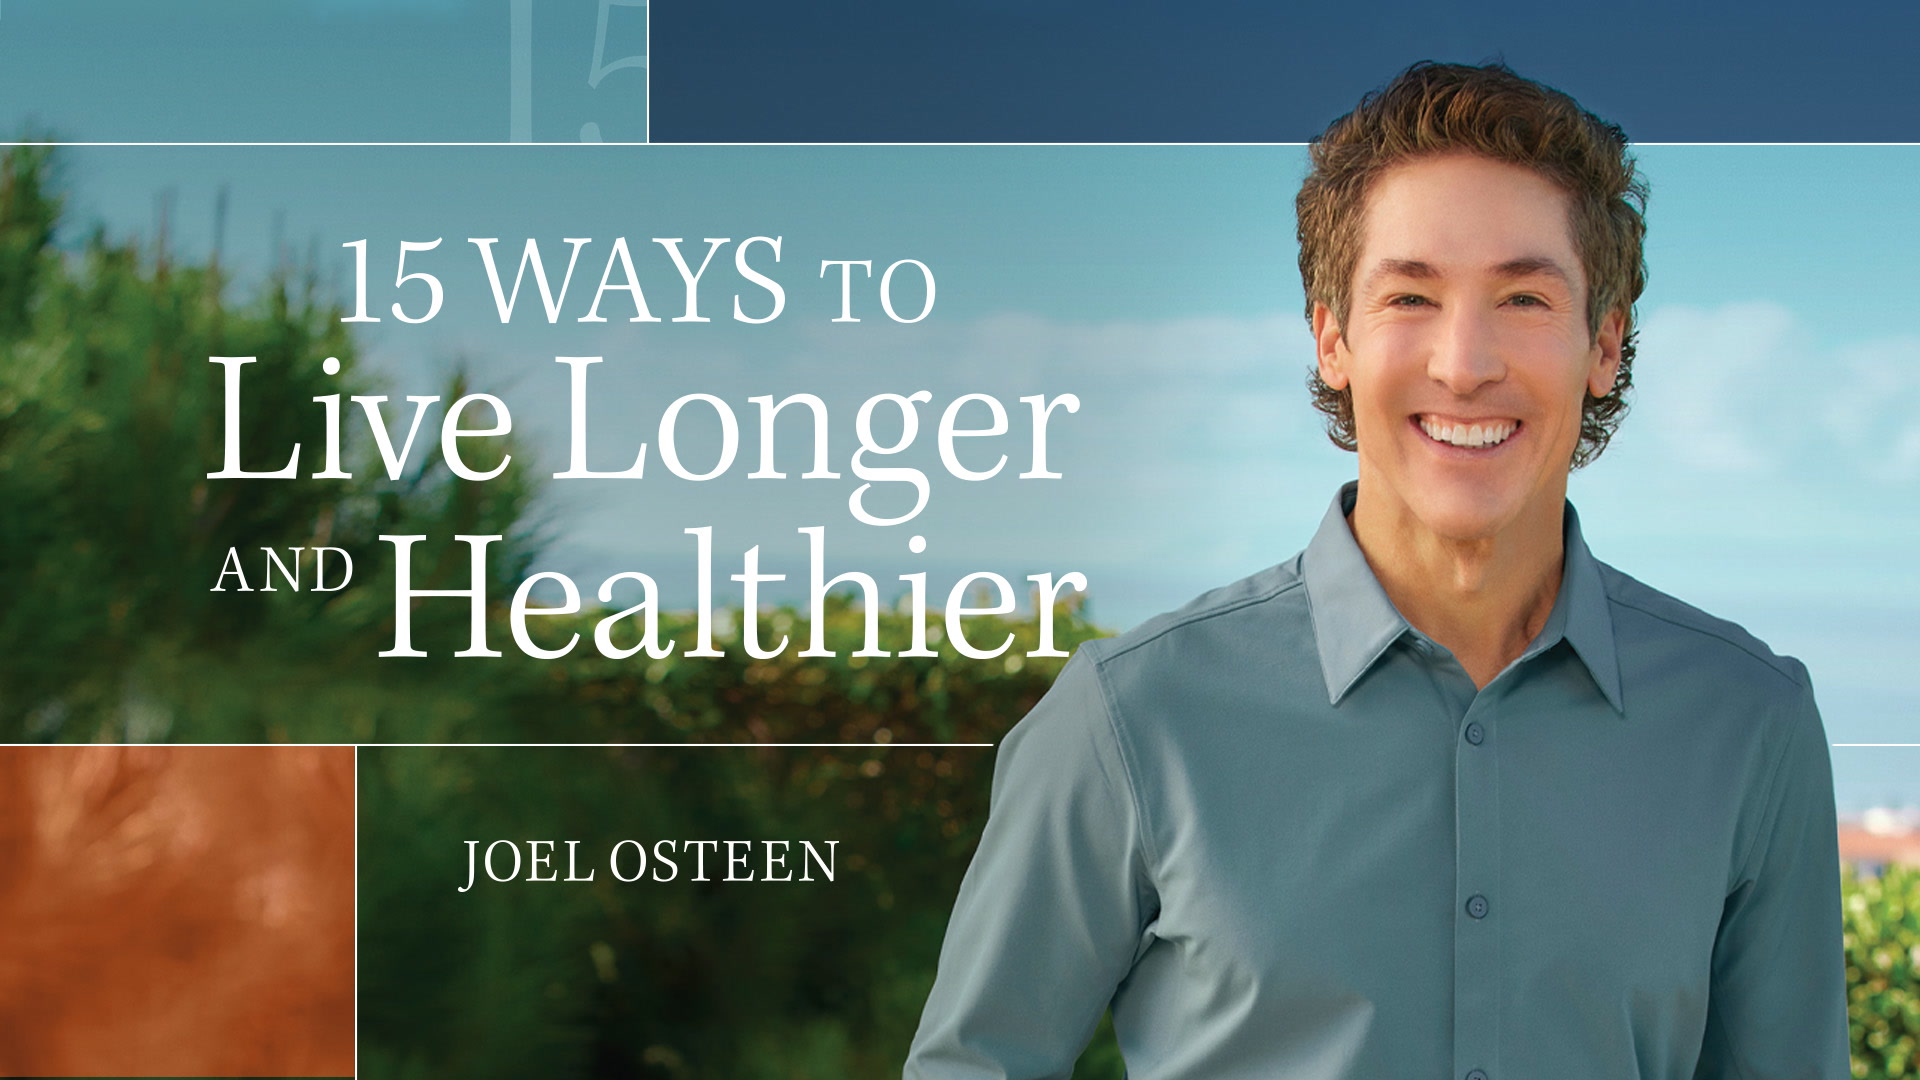 15_ways_to_live_longer_and_healthier.jpeg